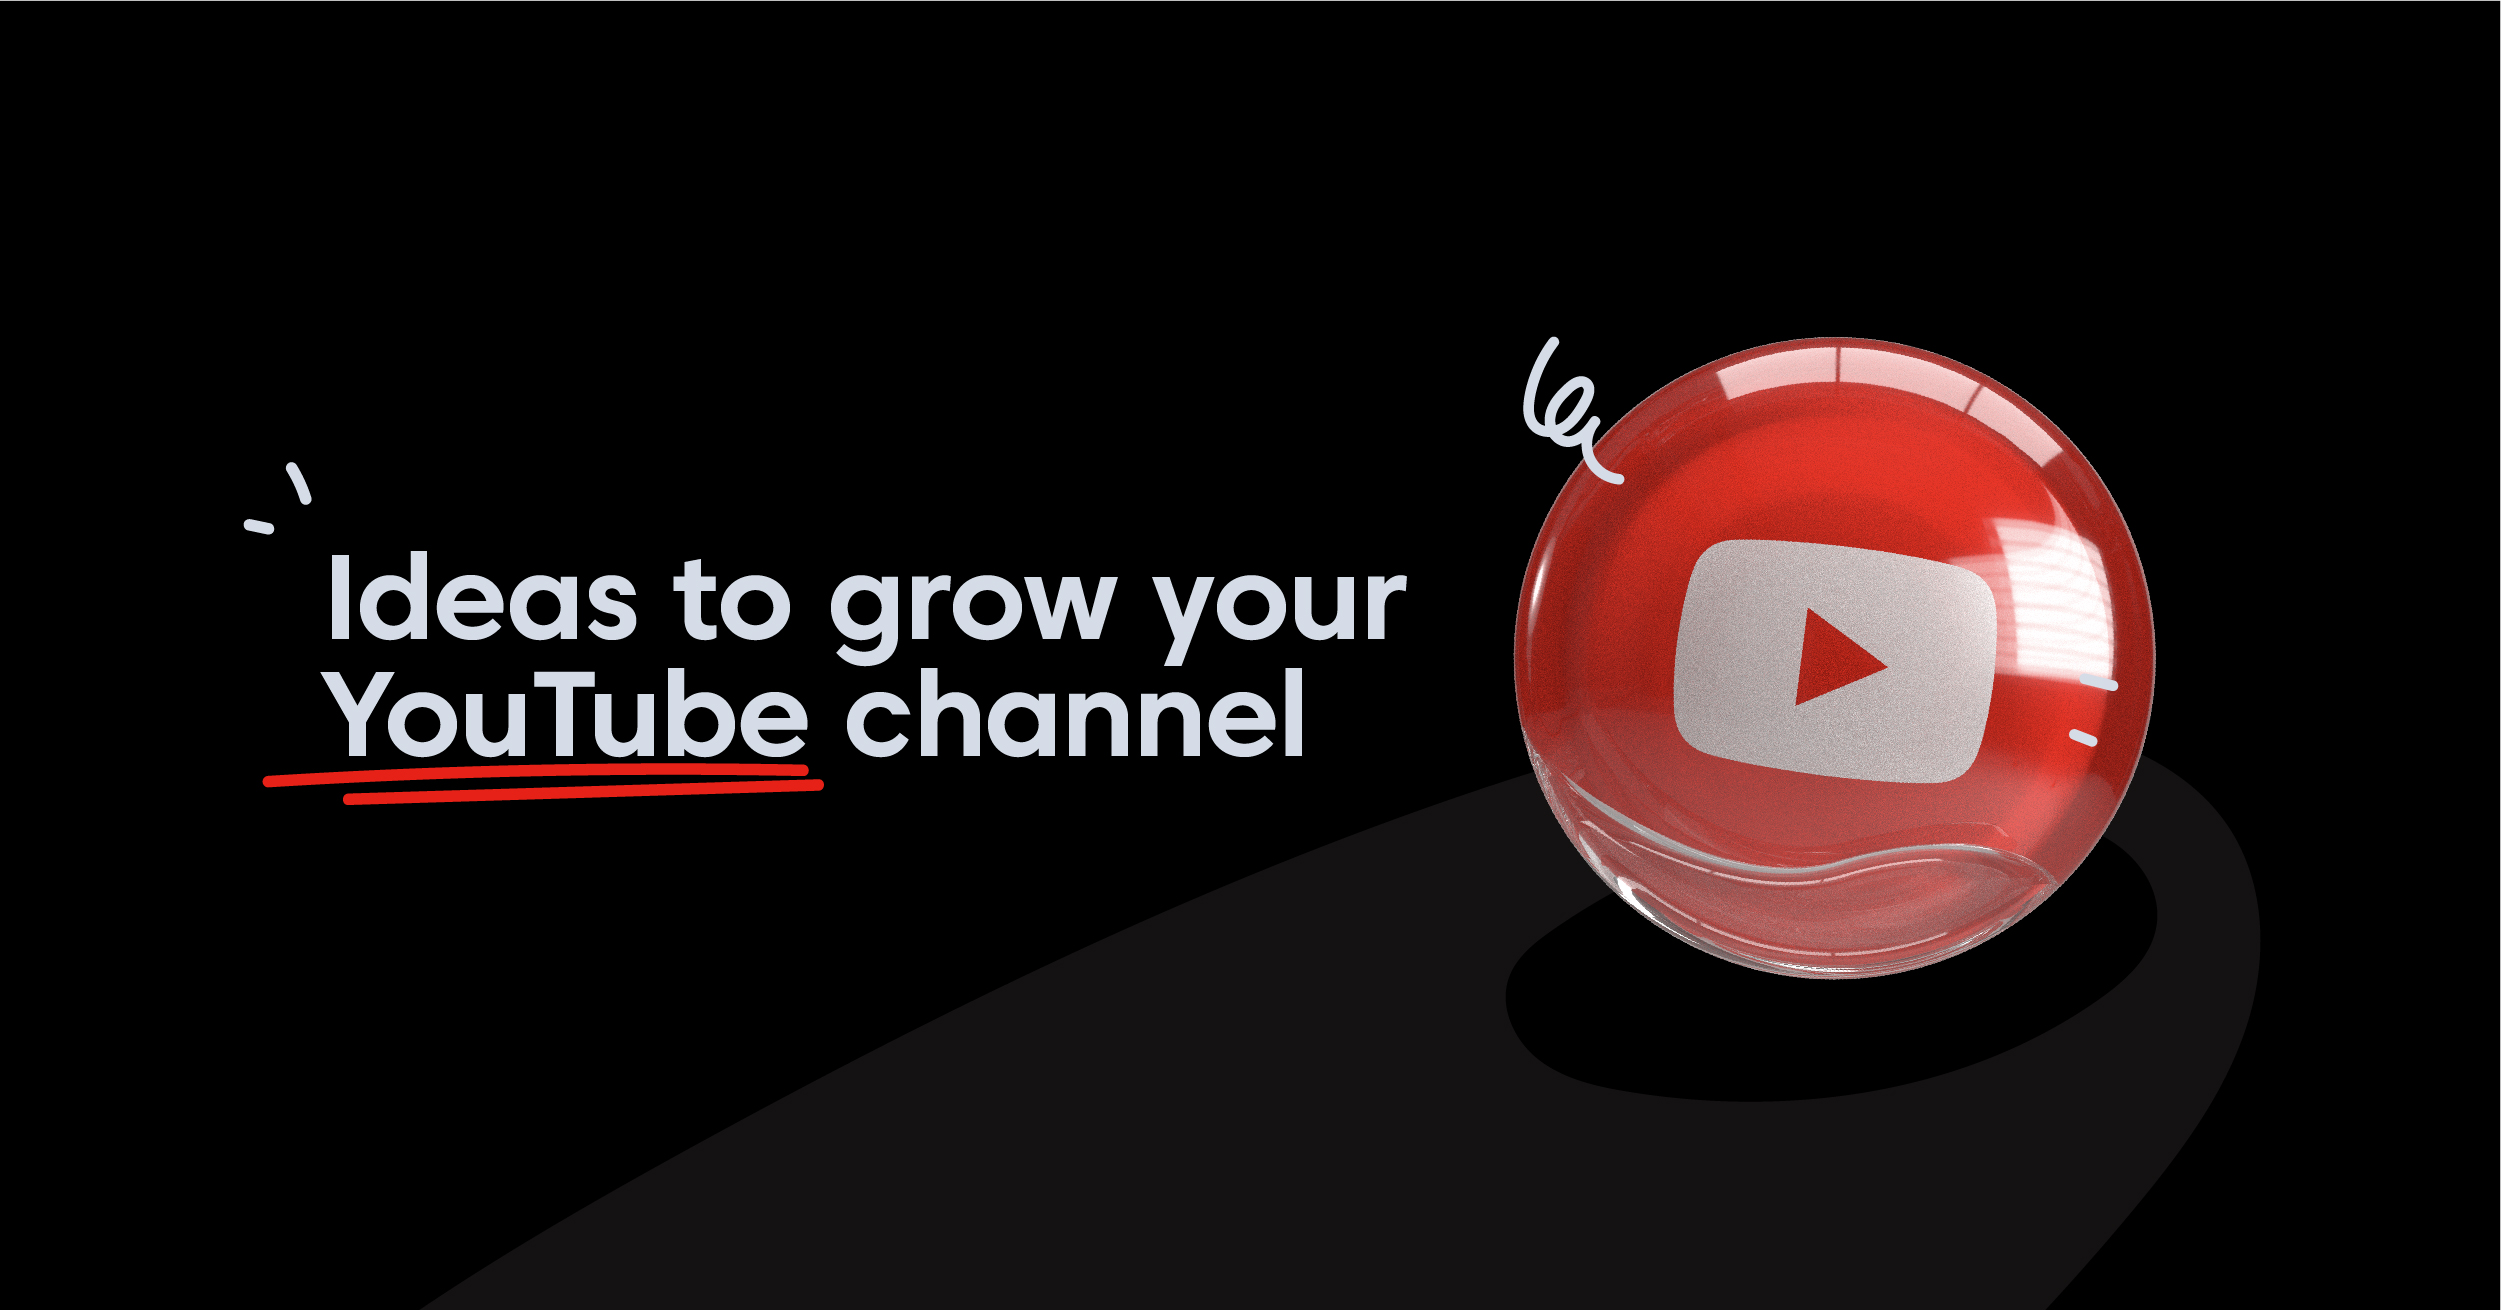 15 Live Streaming Ideas to Grow Your YouTube Channel in 2023